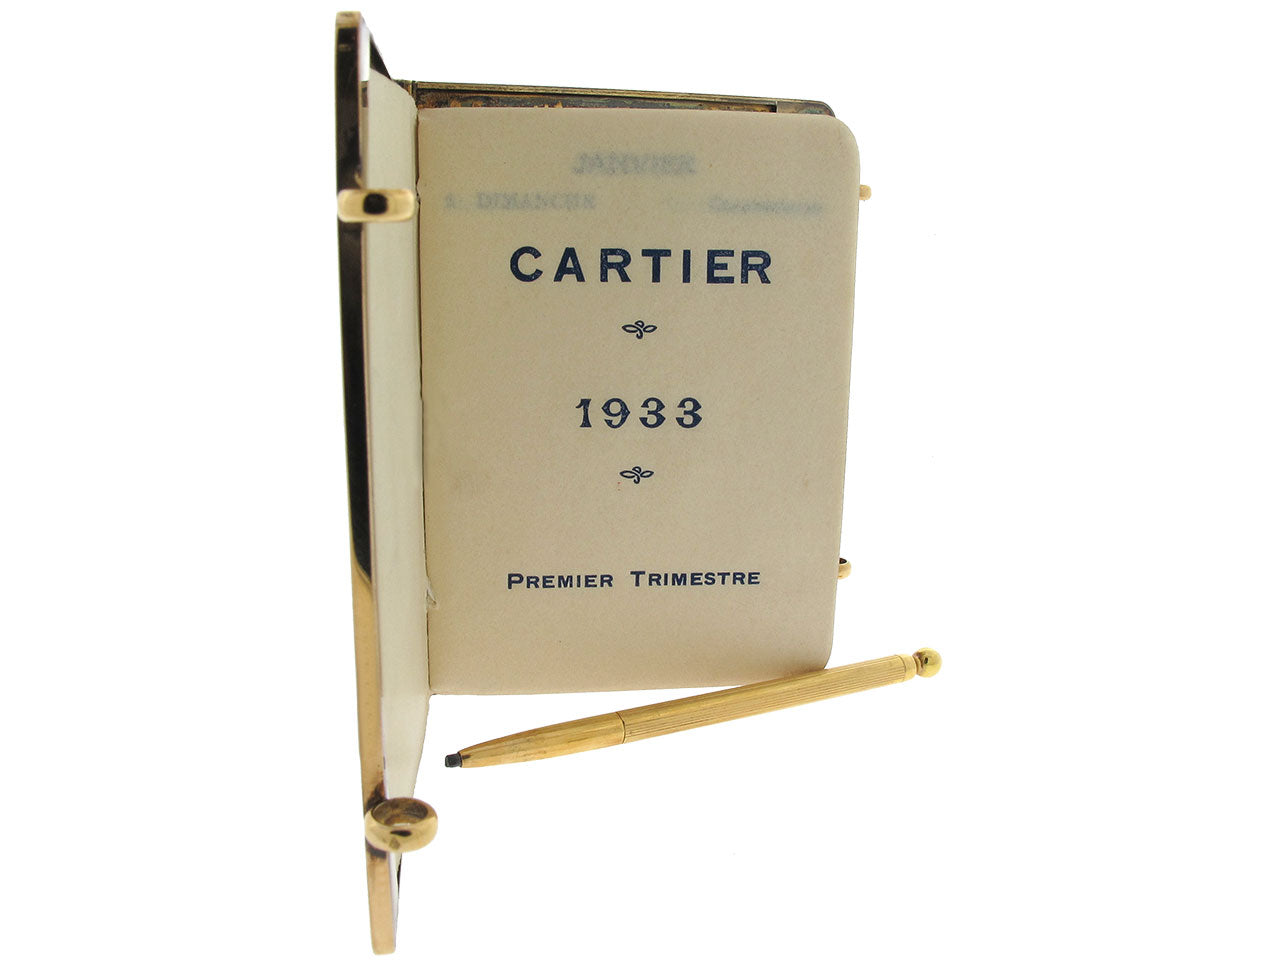 Exceptional Cartier Art Deco Writing Journal and Pencil in 18K